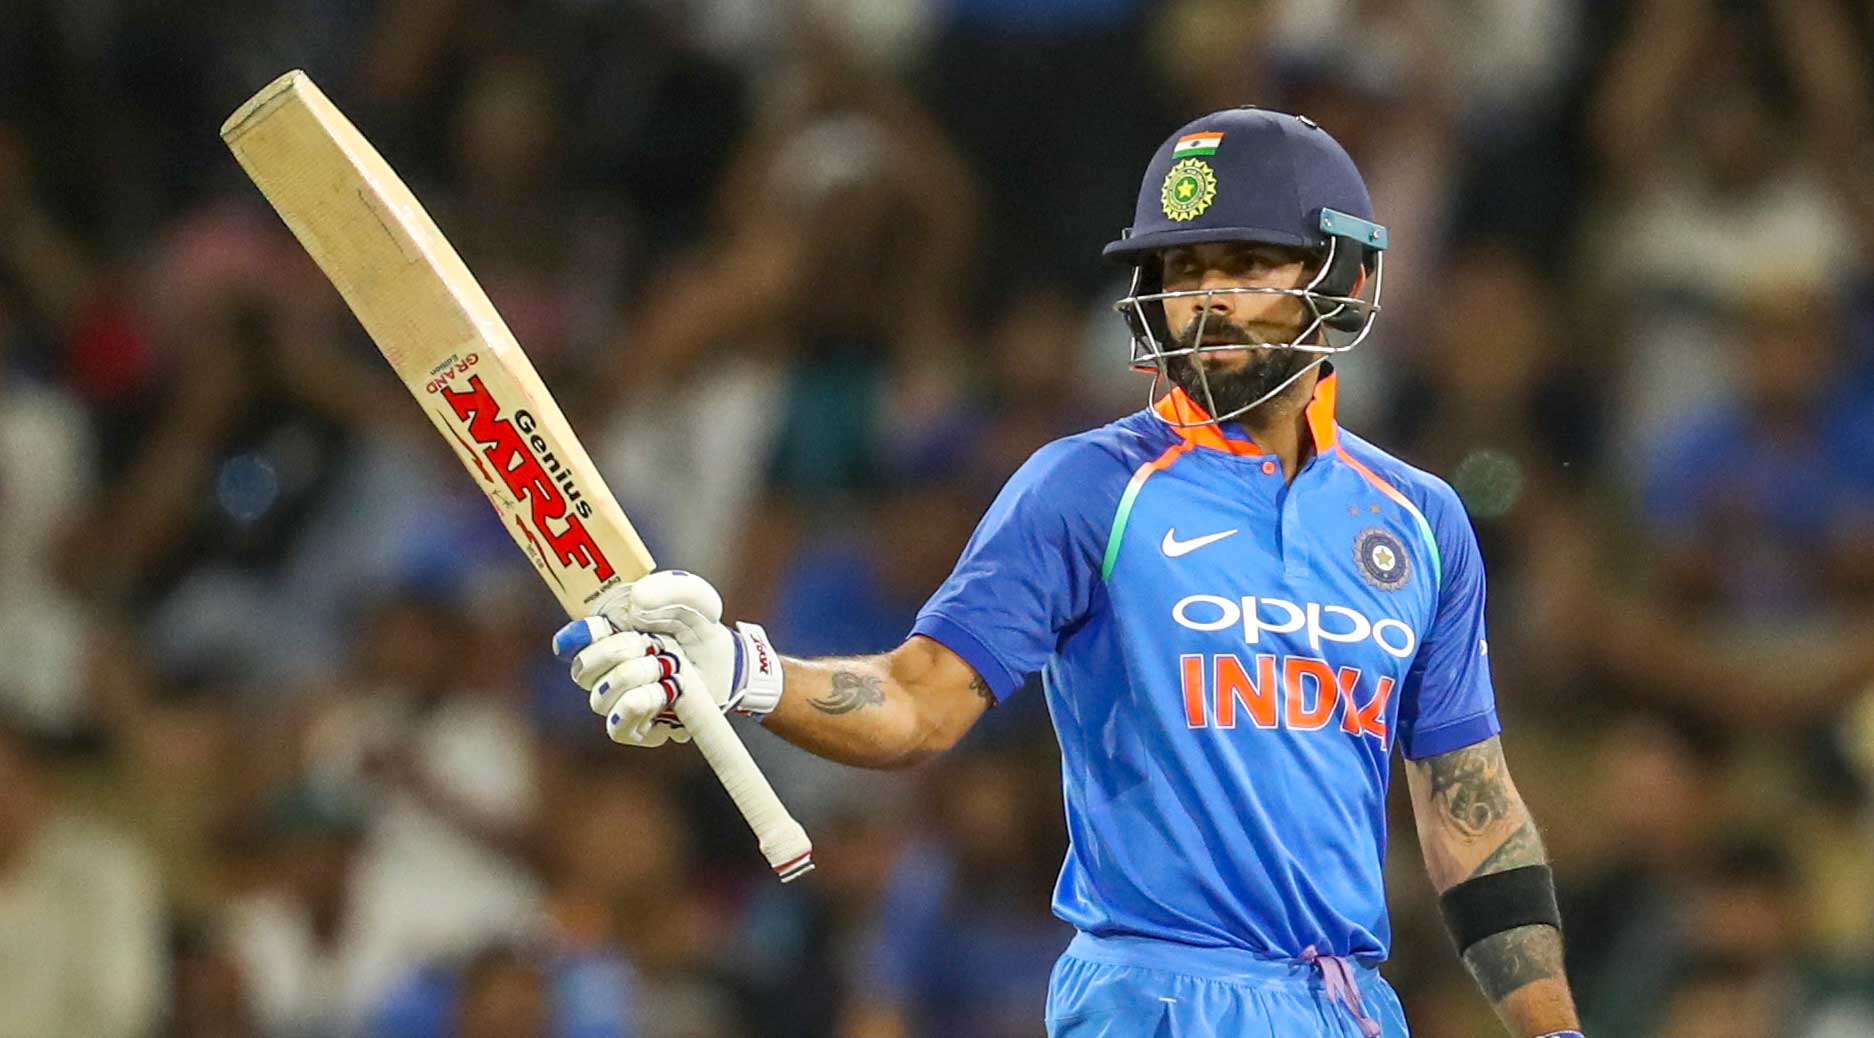 Indian Men S Cricket Team Captain Virat Kohli Has Made History By Winning Top Three Icc Awards In One Year Telegraph India Pujara seemed to be a product of this new culture. cricket team captain virat kohli has